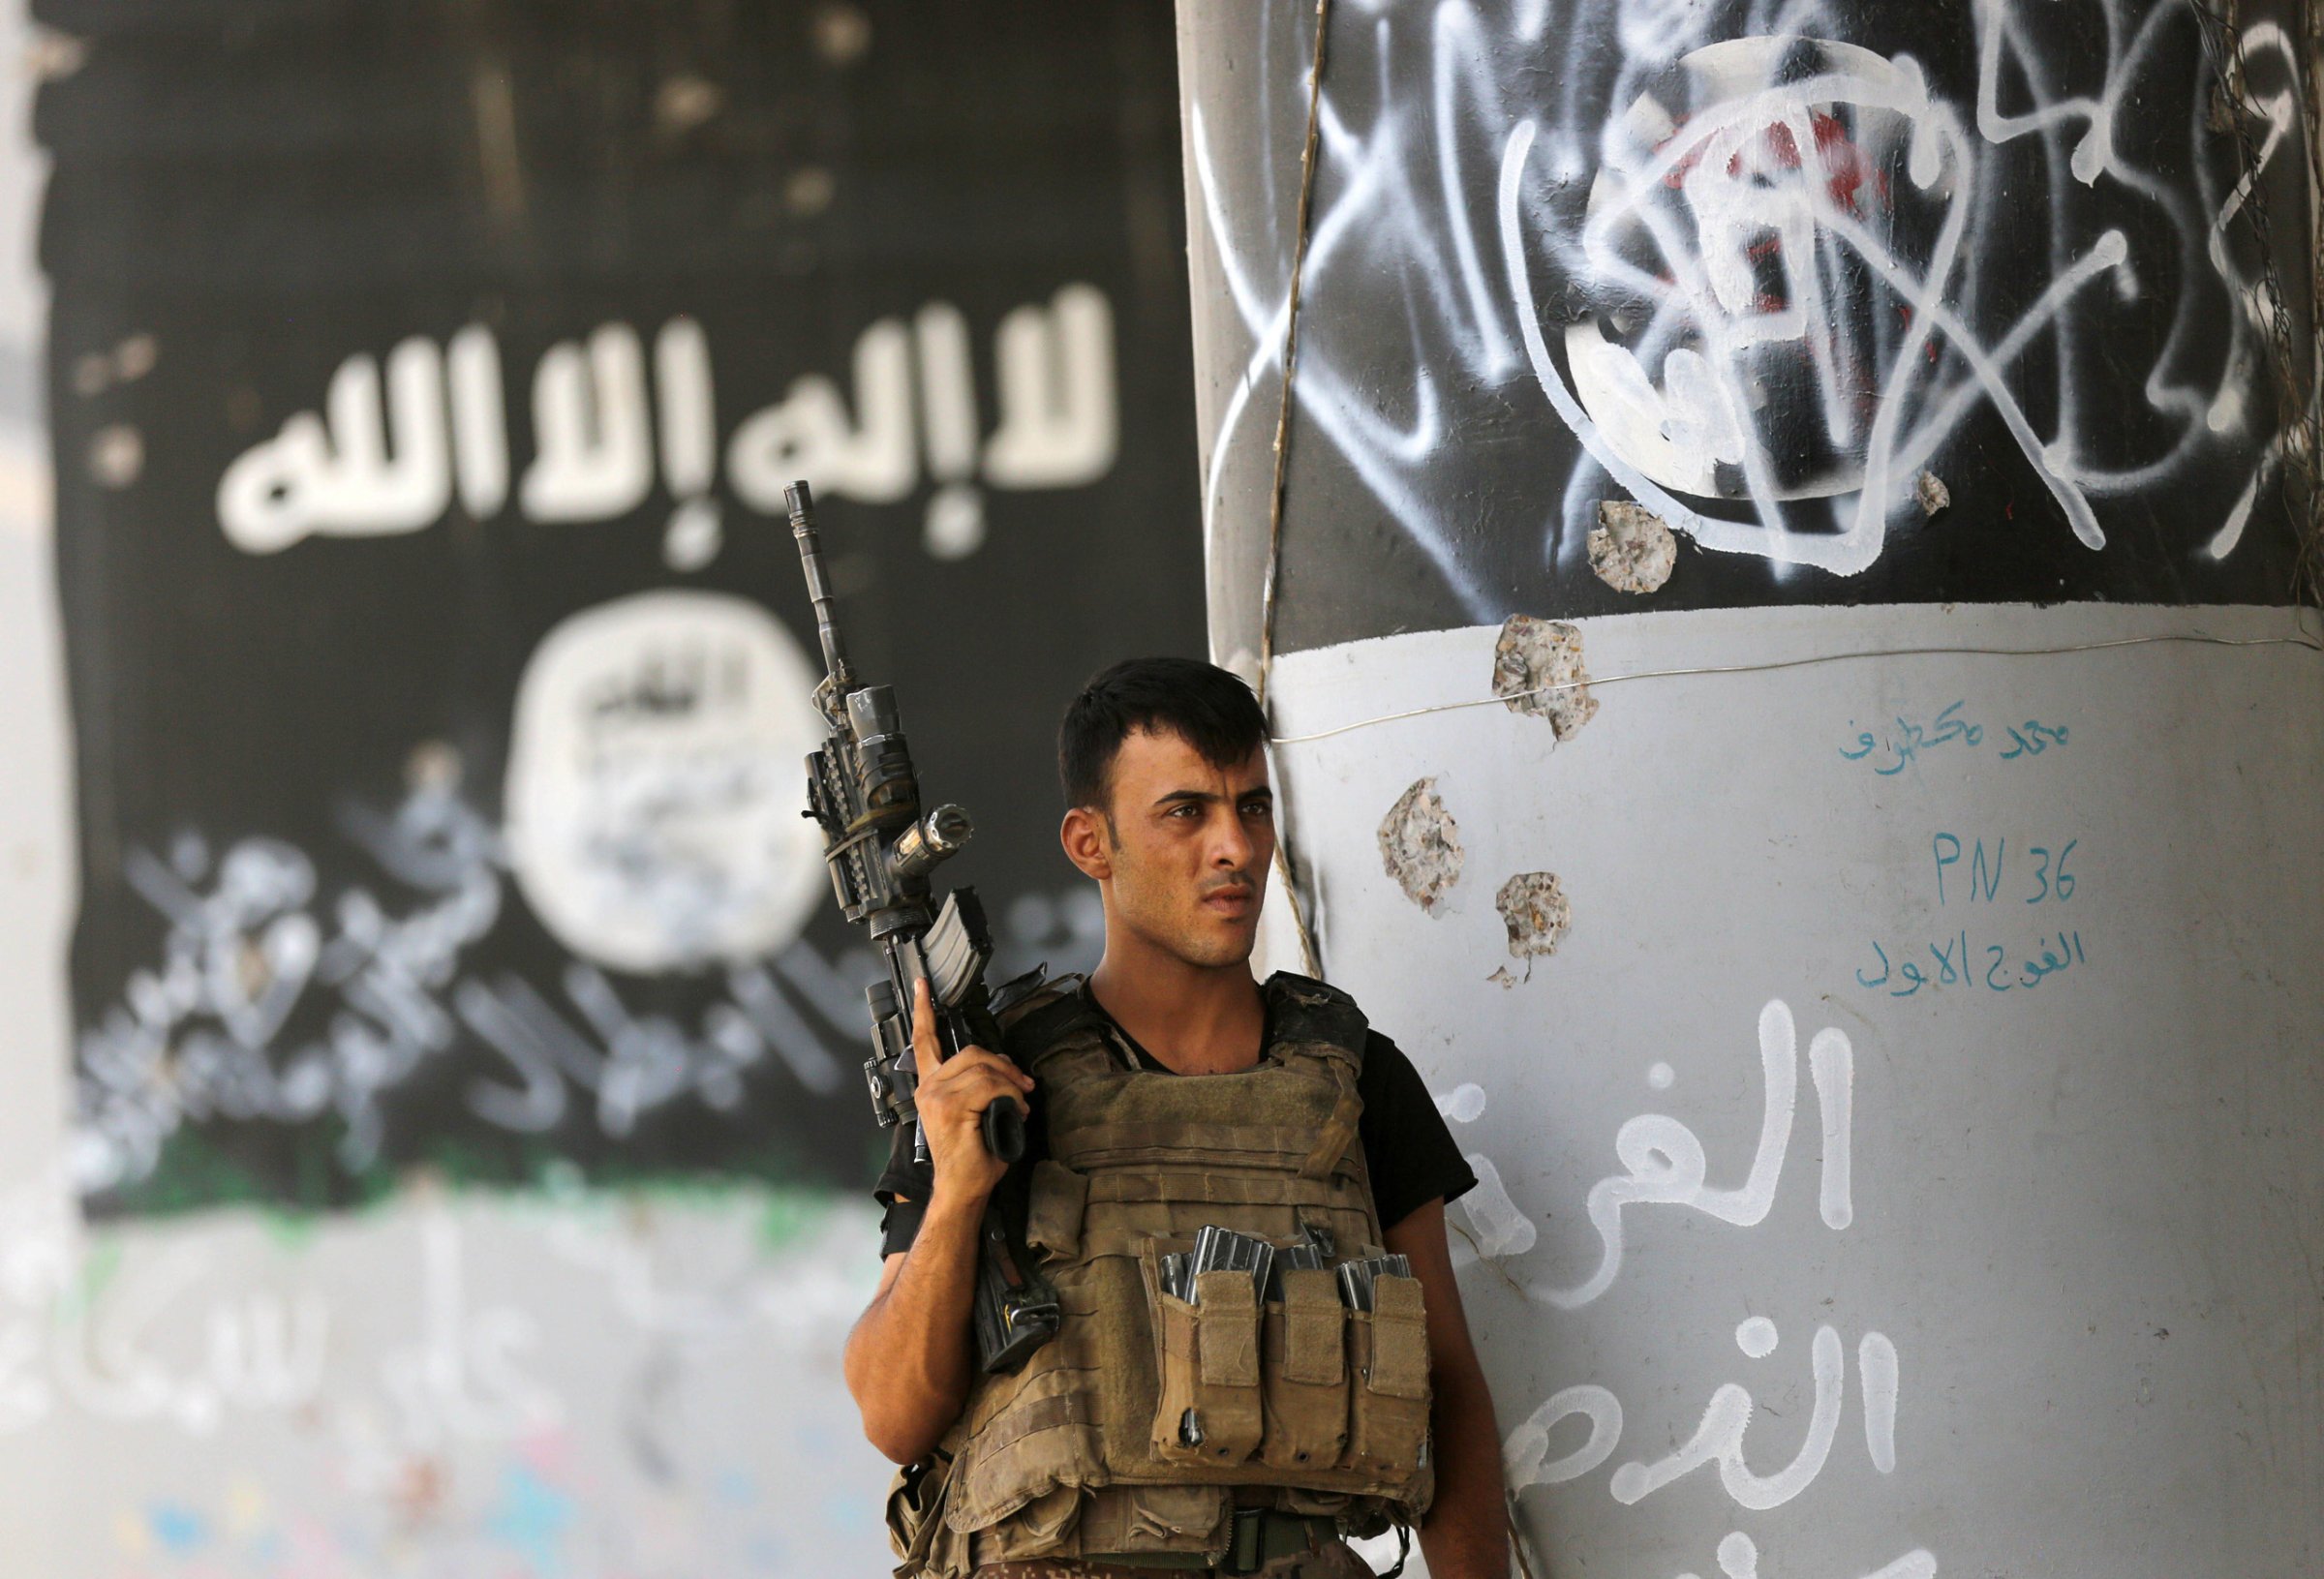 A member of Iraqi counterterrorism forces stands guard near Islamic State militant graffiti in Fallujah, Iraq, Monday, June 27, 2016. Thick clouds of black smoke billowed over northwest Fallujah Monday as dozens of homes continued to burn a day after the city was declared ‚Äúfully liberated‚Ä˘ from the Islamic State group. Iraqi special forces Lt. Gen. Abdel Wahab al-Saadi who led the operation to retake the city, said that IS militants torched hundreds of houses in Fallujah's north and west as they fled Sunday, just as the fighters did in many of the city's other neighborhoods over the course of the operation. Partial translation of Arabic writing on the wall reads, "patience honorable Fallujah, victory is near." (AP Photo/Hadi Mizban)